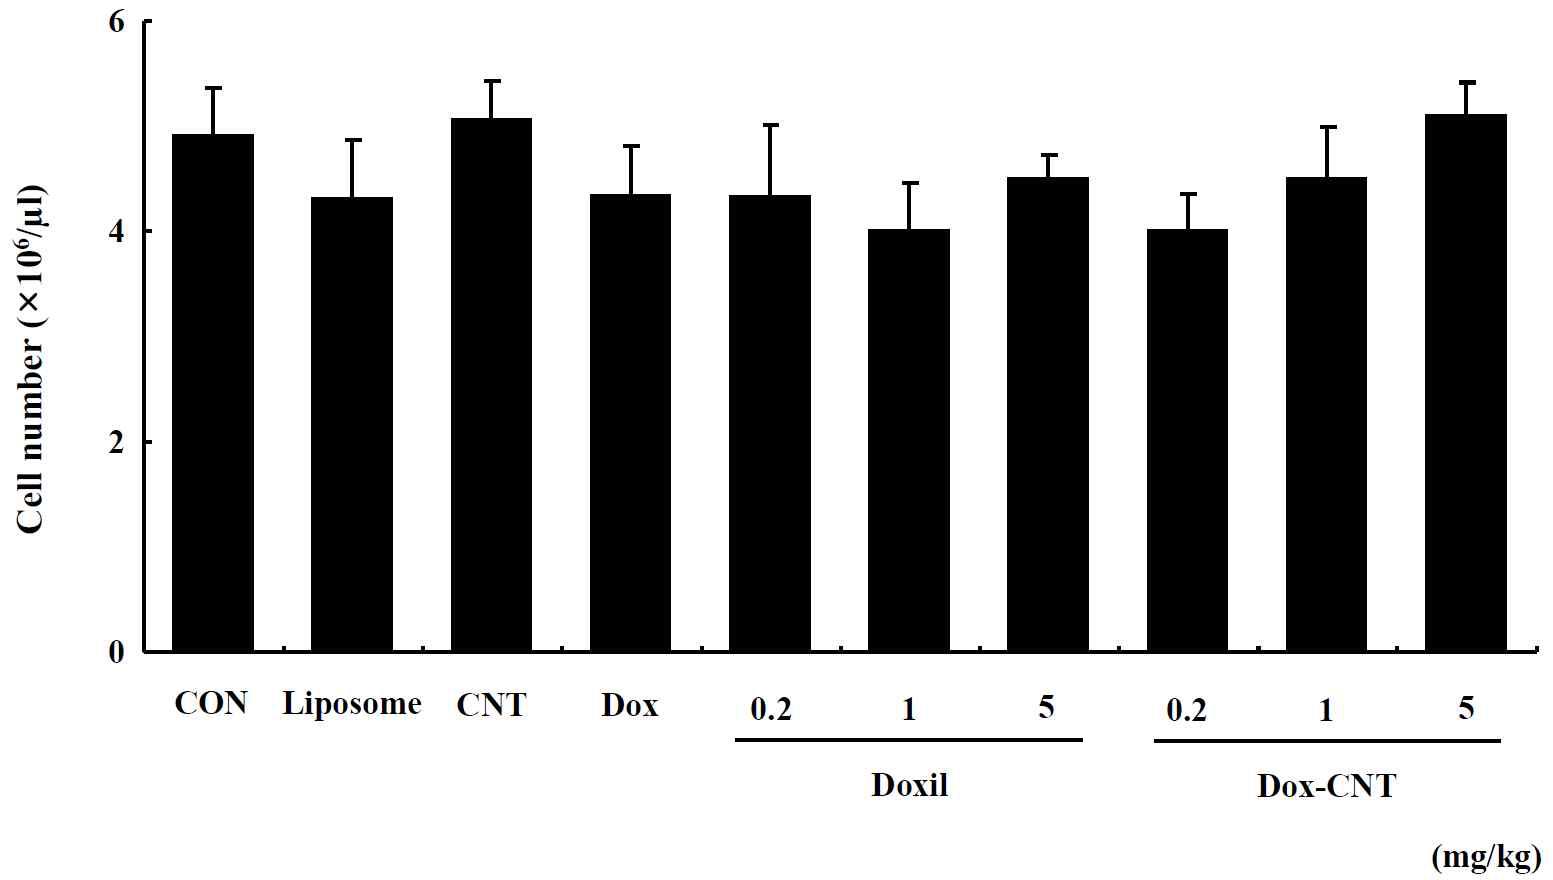 Red blood cell counts in male ICR mice of repeated exposure for 14 days. Mice were respectively administered by intravenous injection with liposome, CNT, Dox, Doxil (0.2, 1, 5 mg/kg) and Dox-CNT (0.2, 1, 5 mg/kg). The results are presented as mean ± SE (n = 10). * p < 0.05, significantly different from the control.